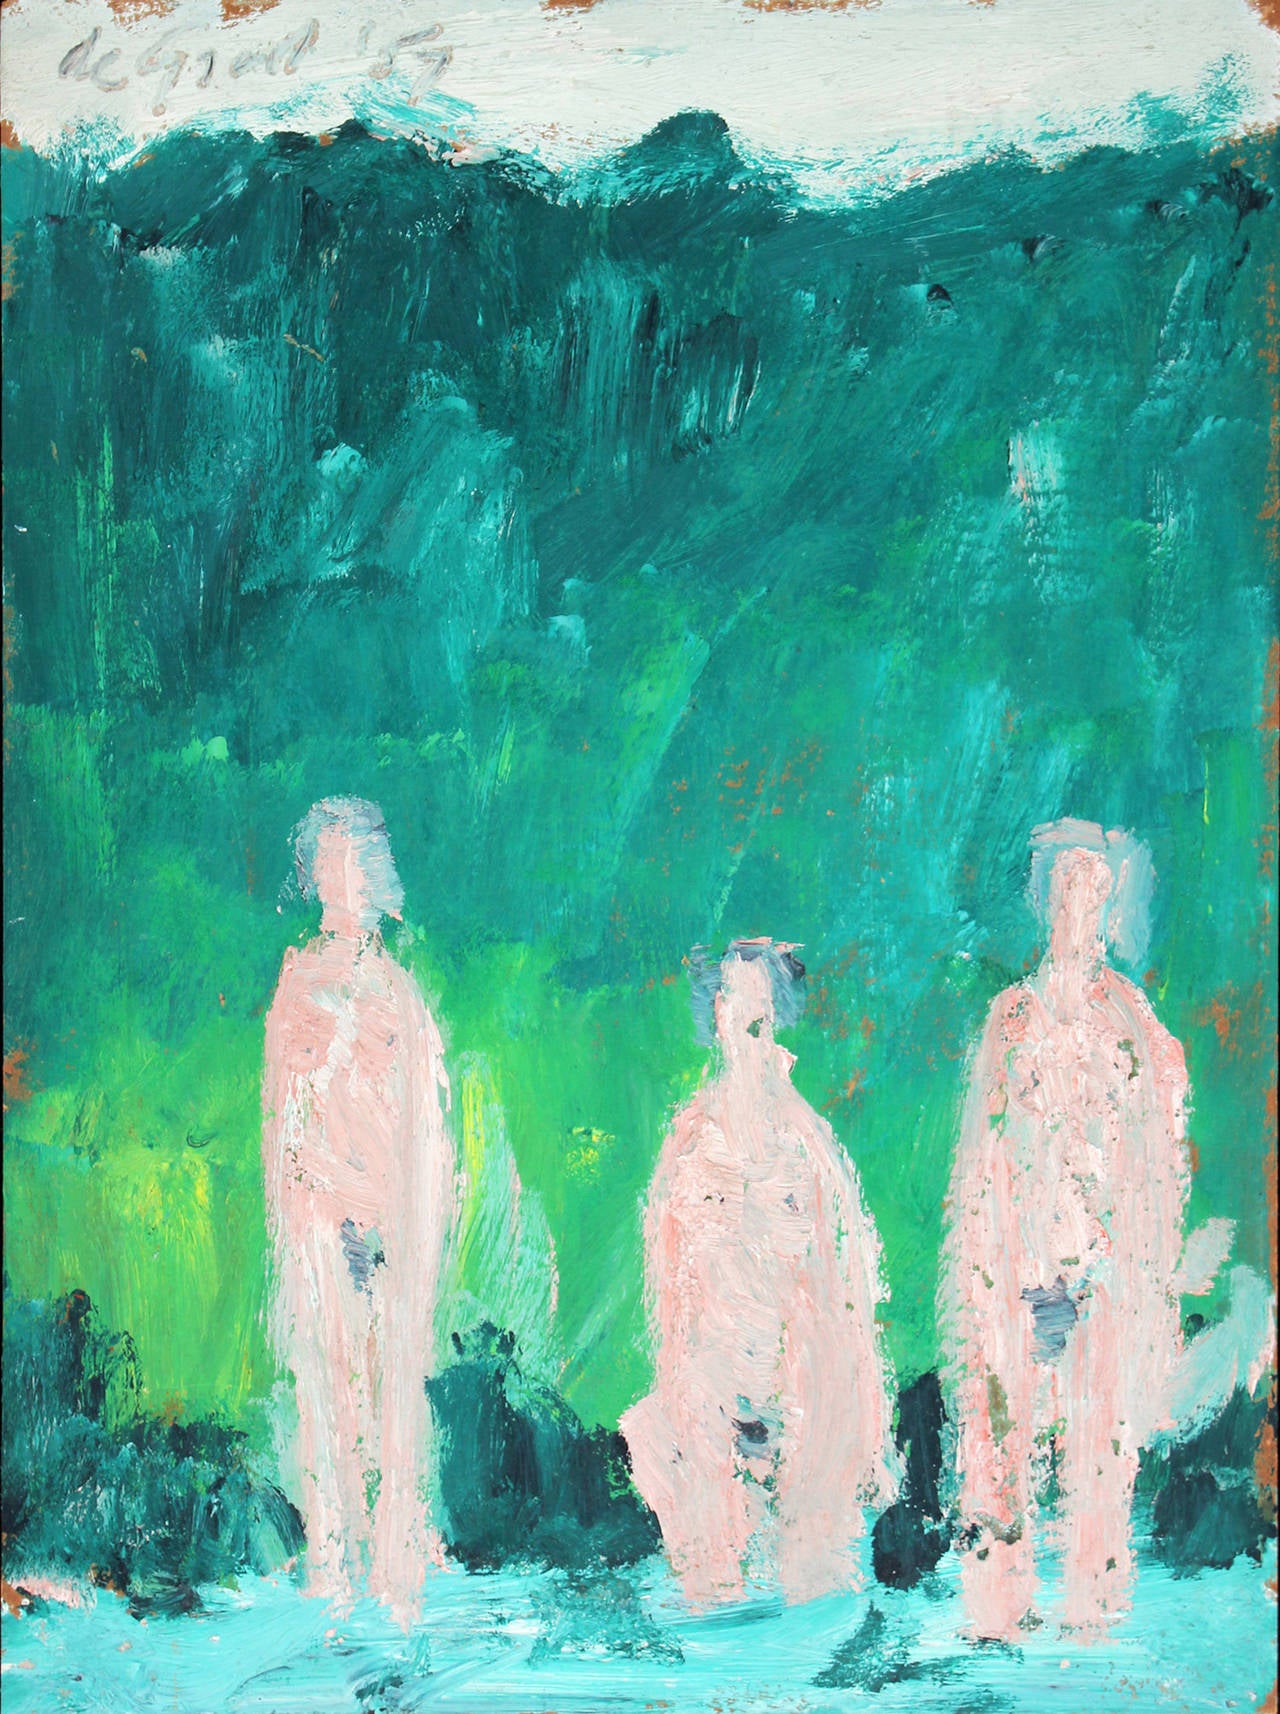 Three Figures in a Landscape - Painting by Nanno de Groot